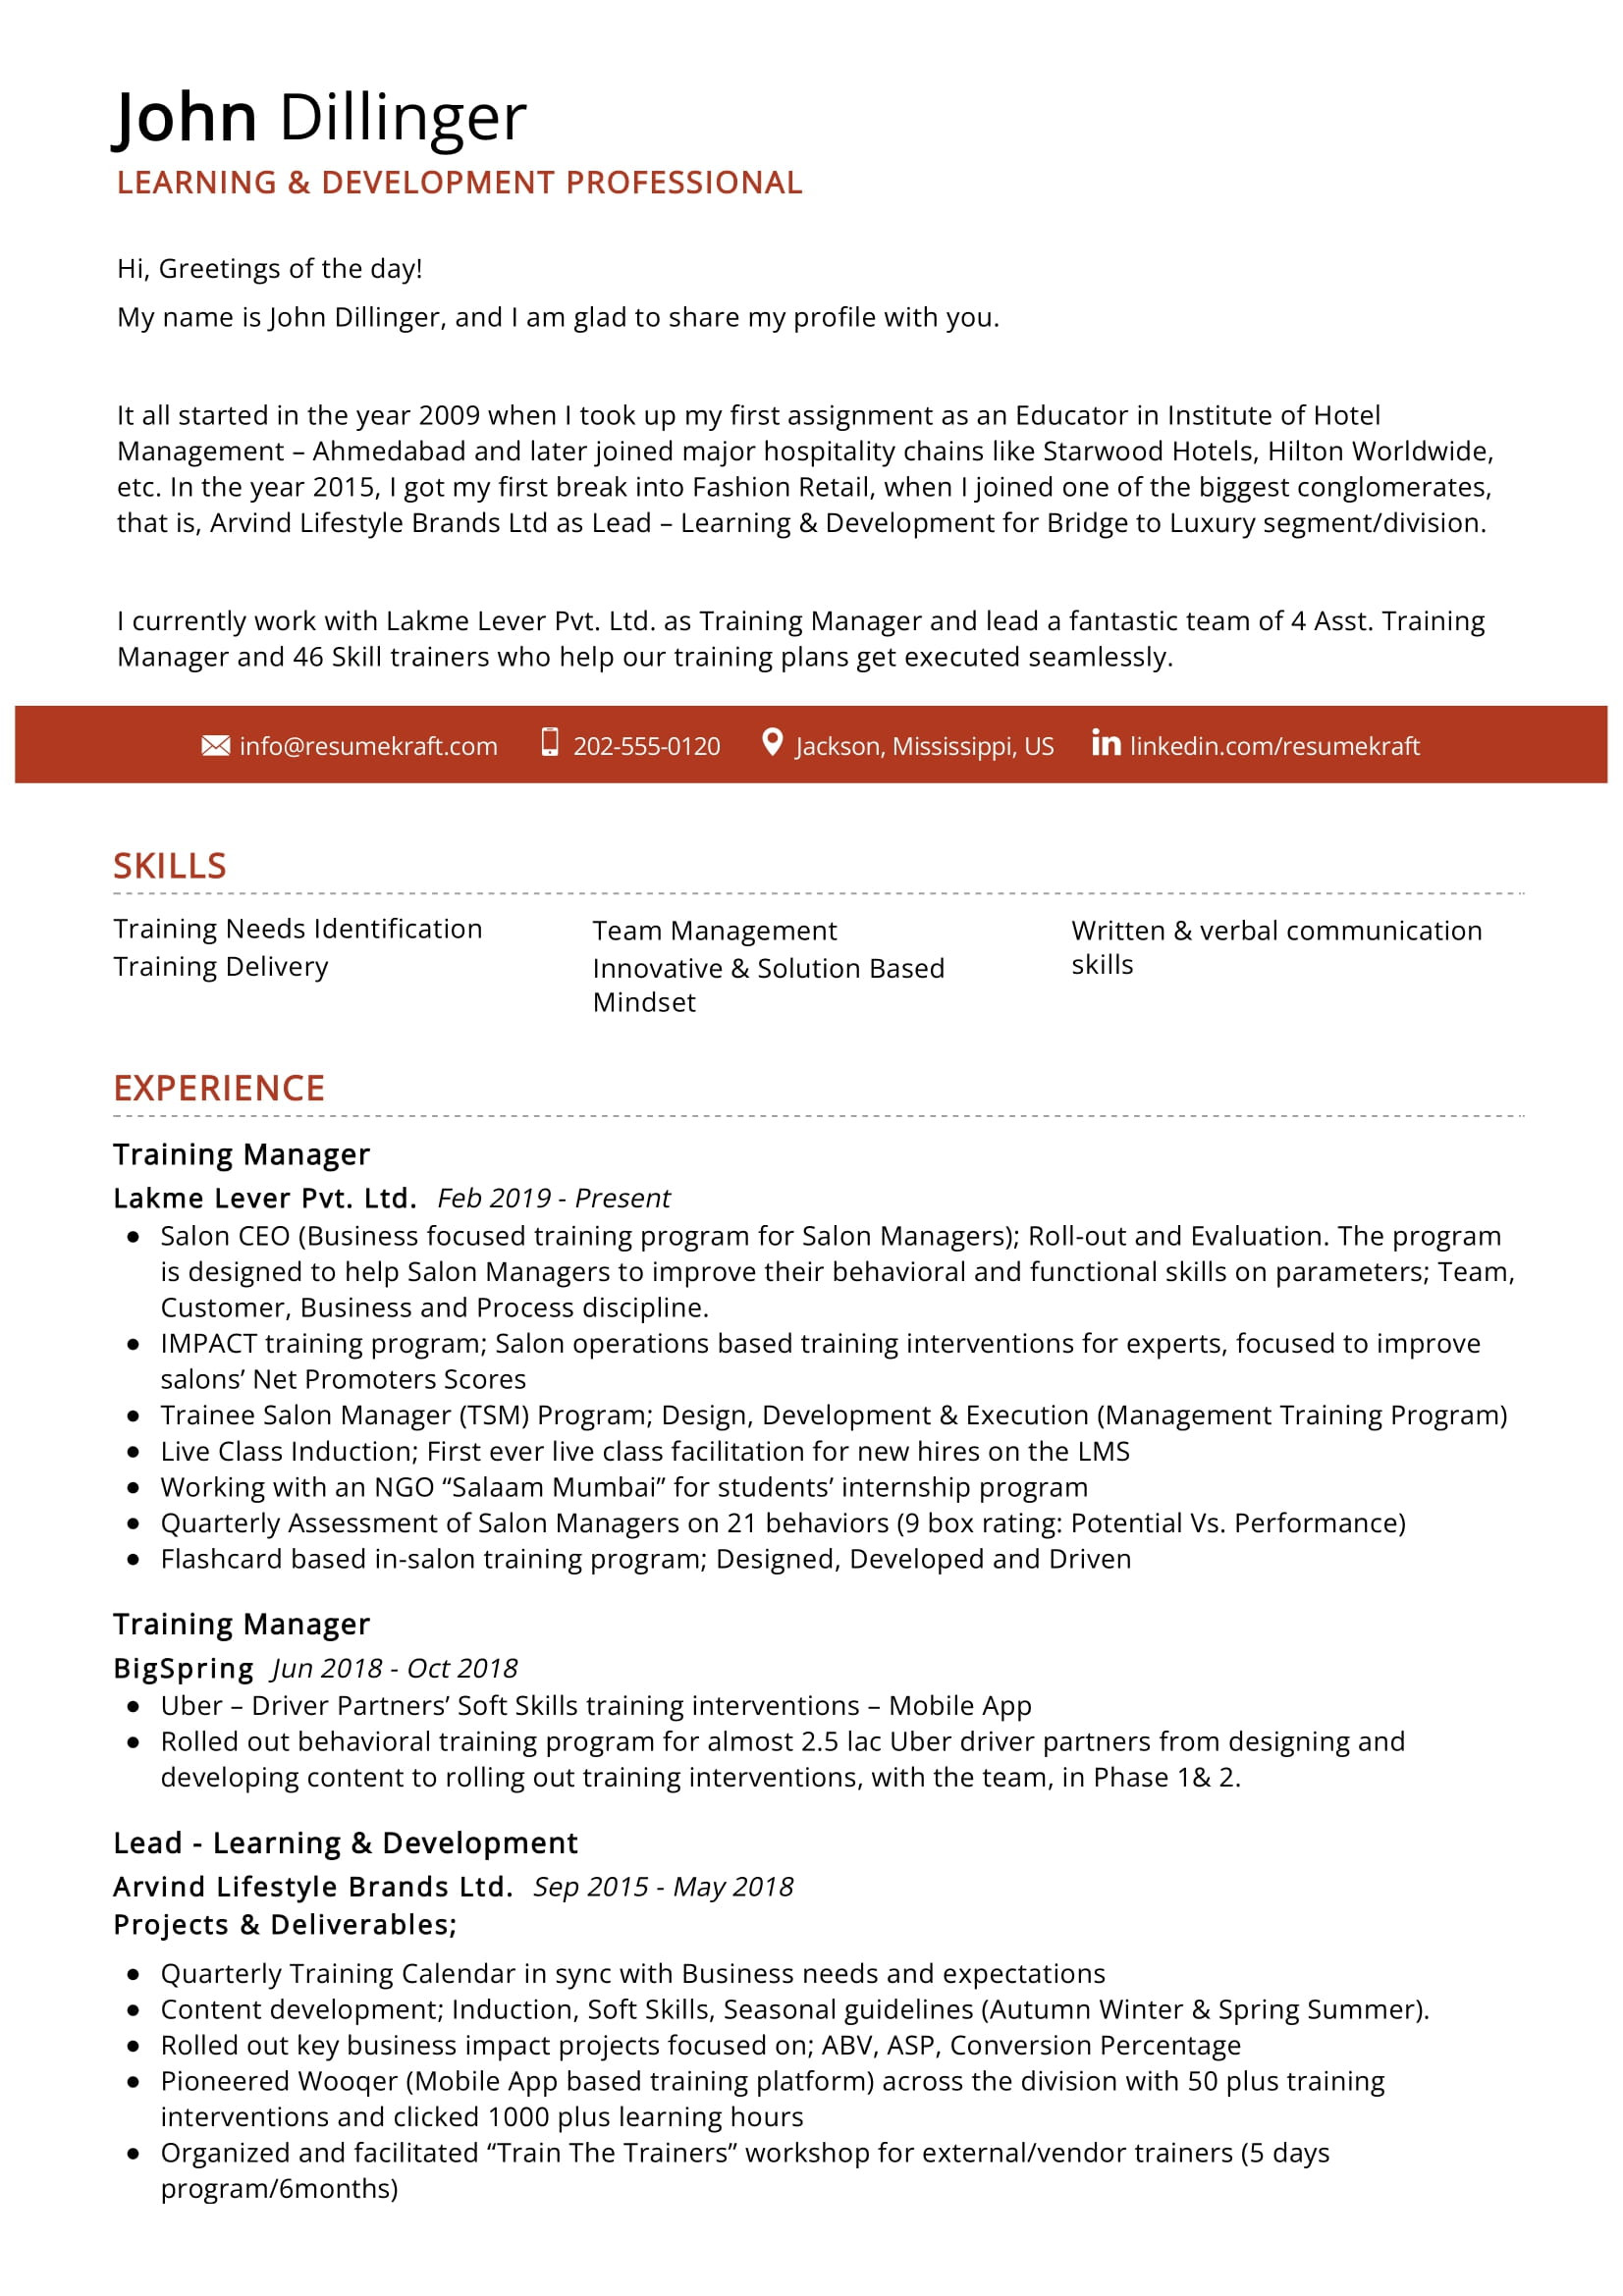 Learning and Development Manager Sample Resume Learning & Development Professional Resume 2022 Writing Tips …